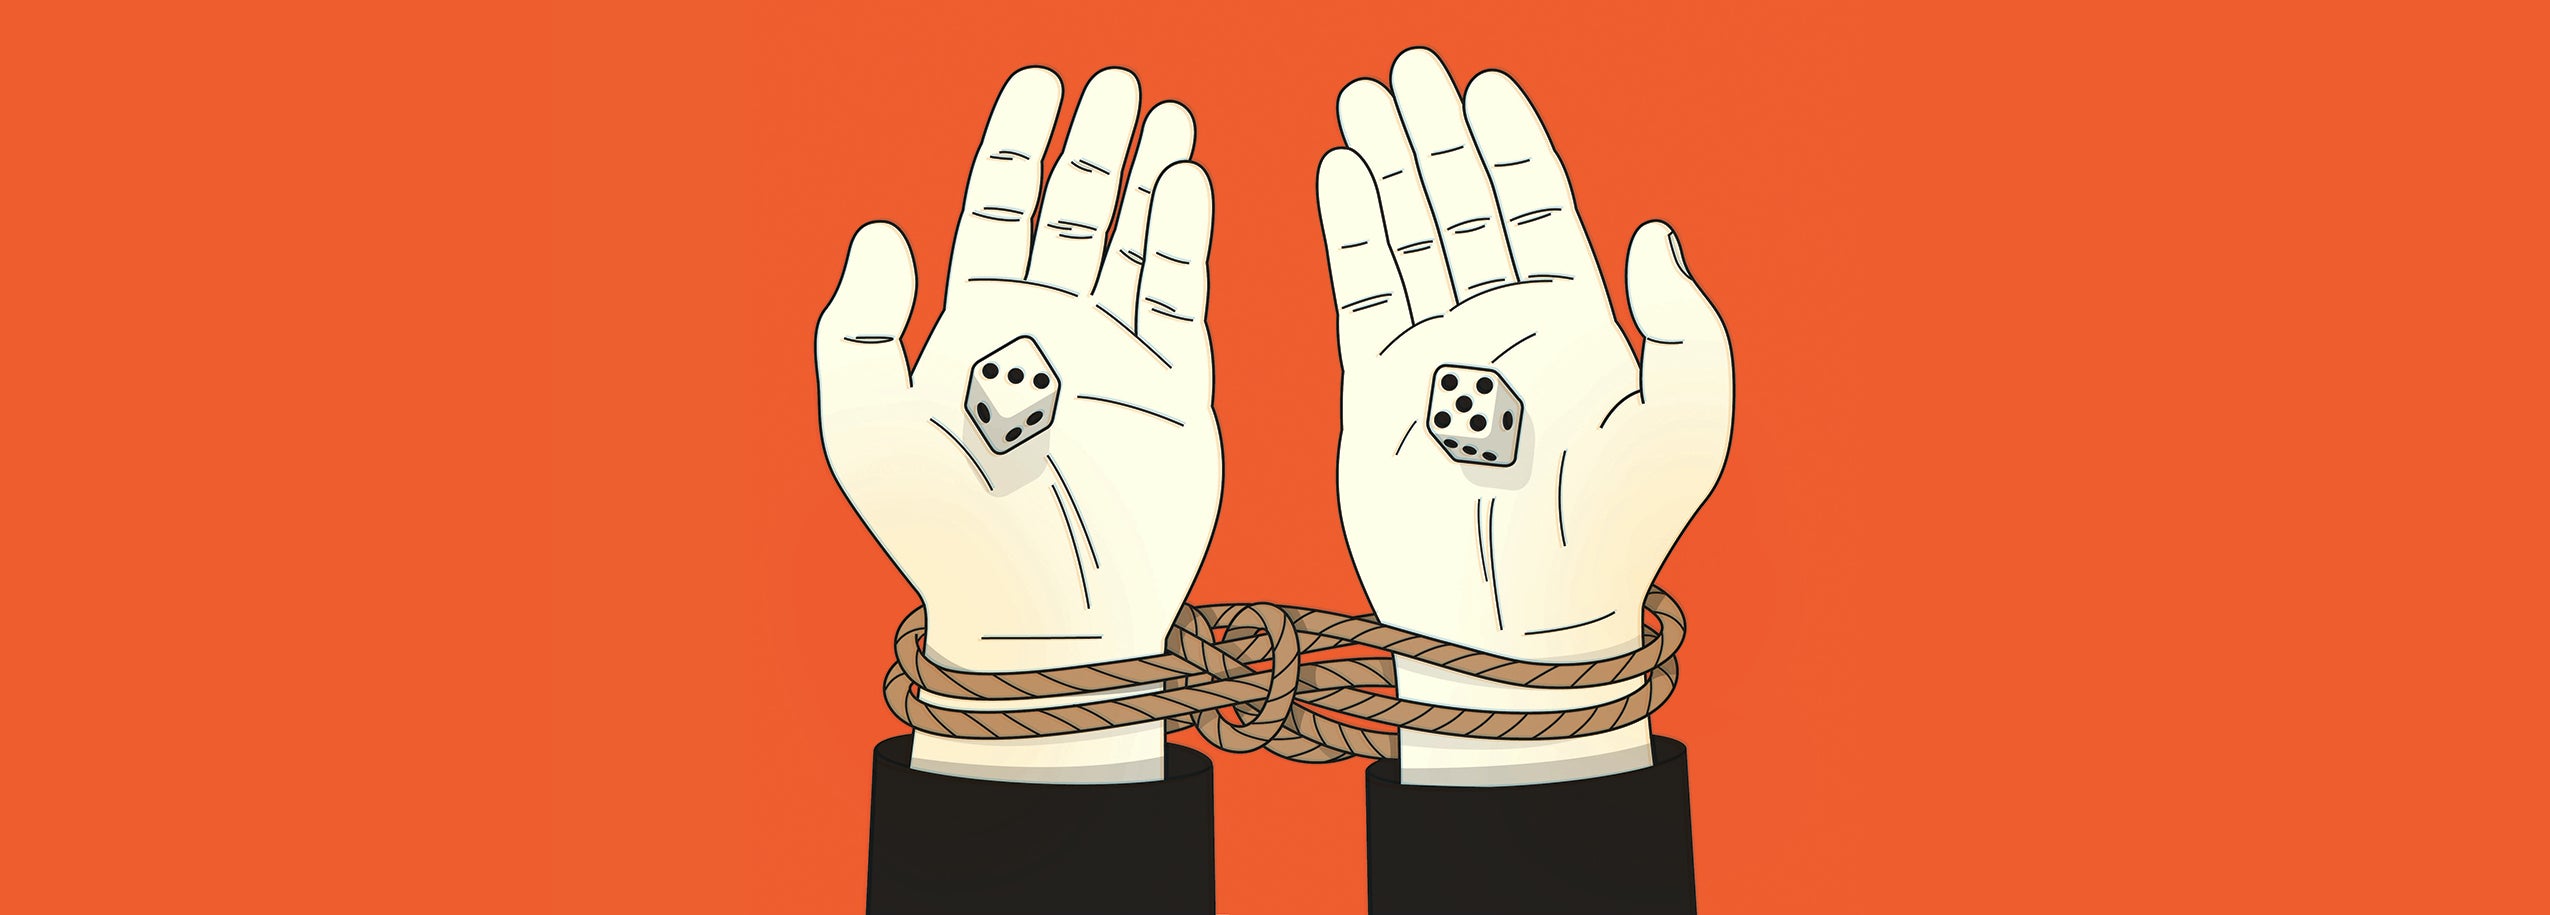 Illustration of two hands tied together and holding dice